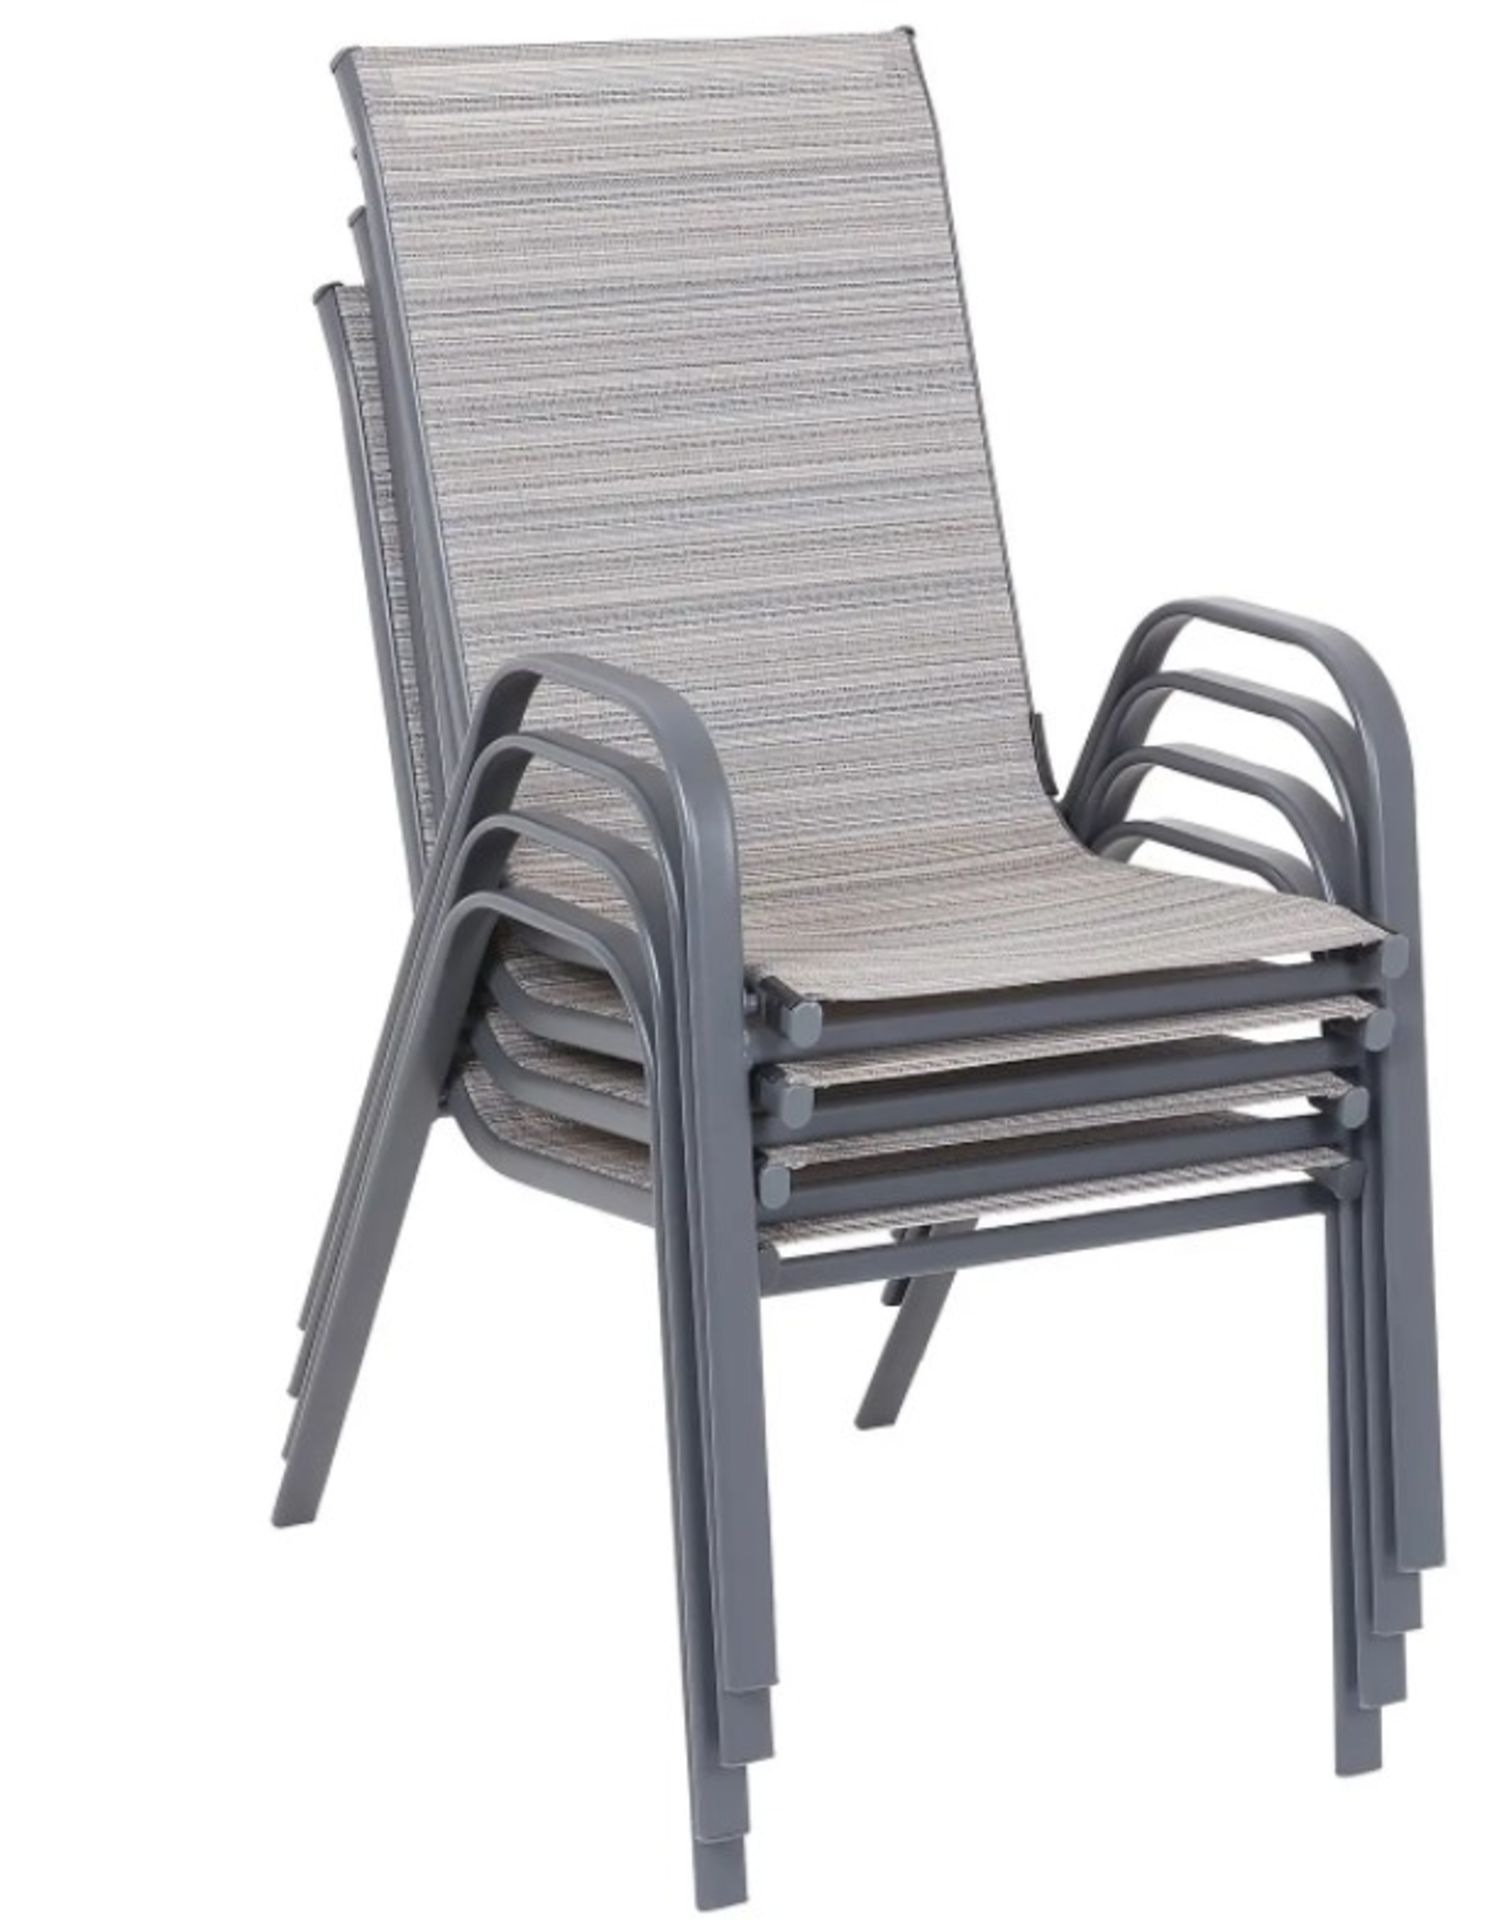 (7C) 7x Andorra Stacking Chair RRP £25 Each. (All Units Appear As New). - Image 2 of 3